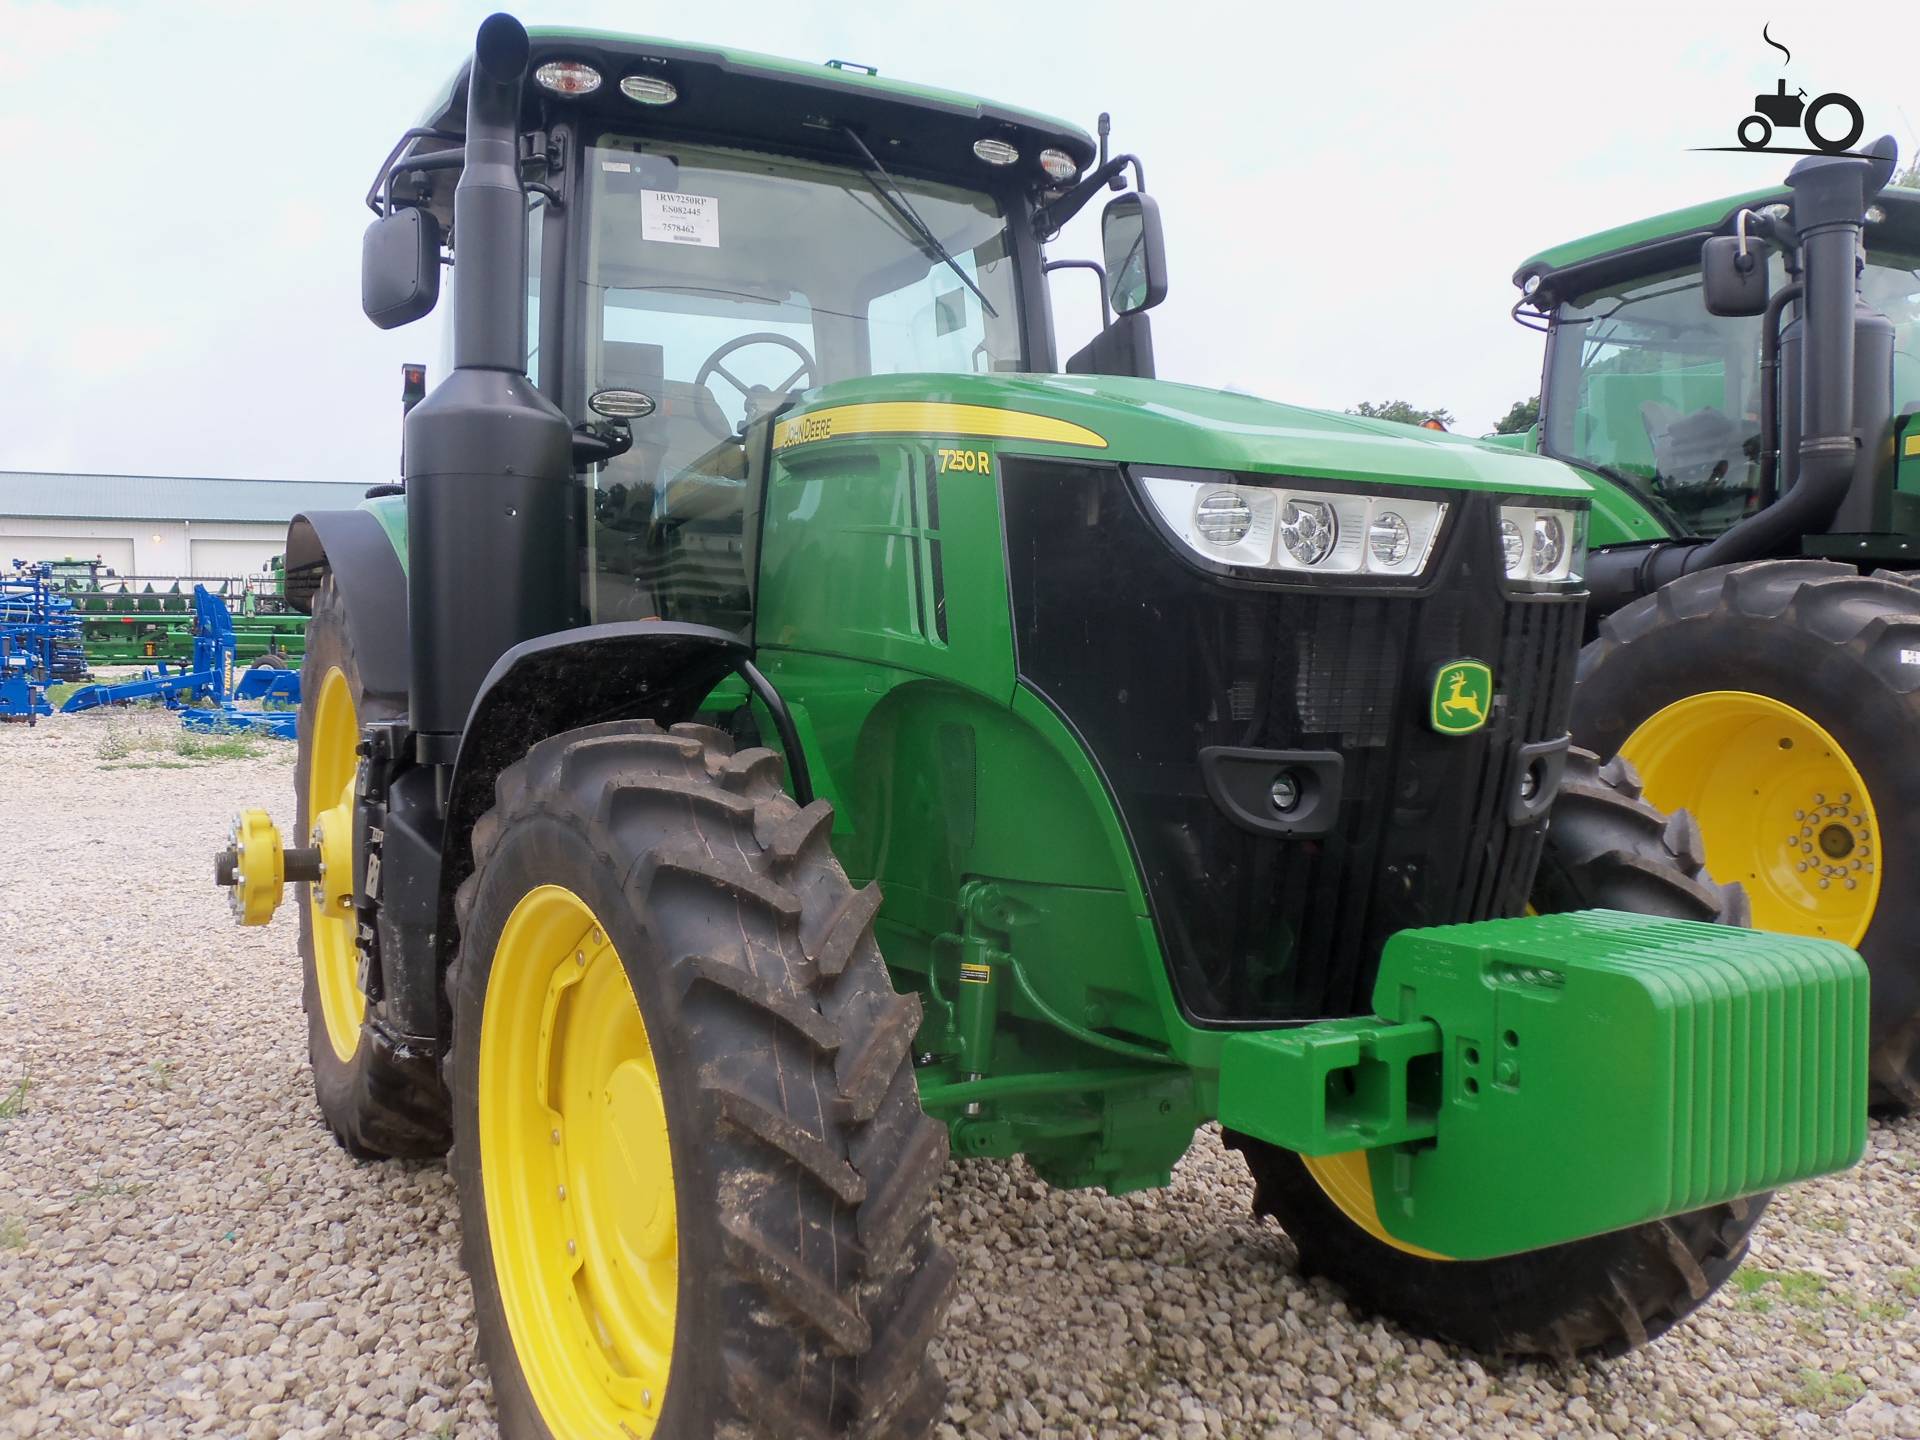 John Deere 7250R | Picture made by marion5900